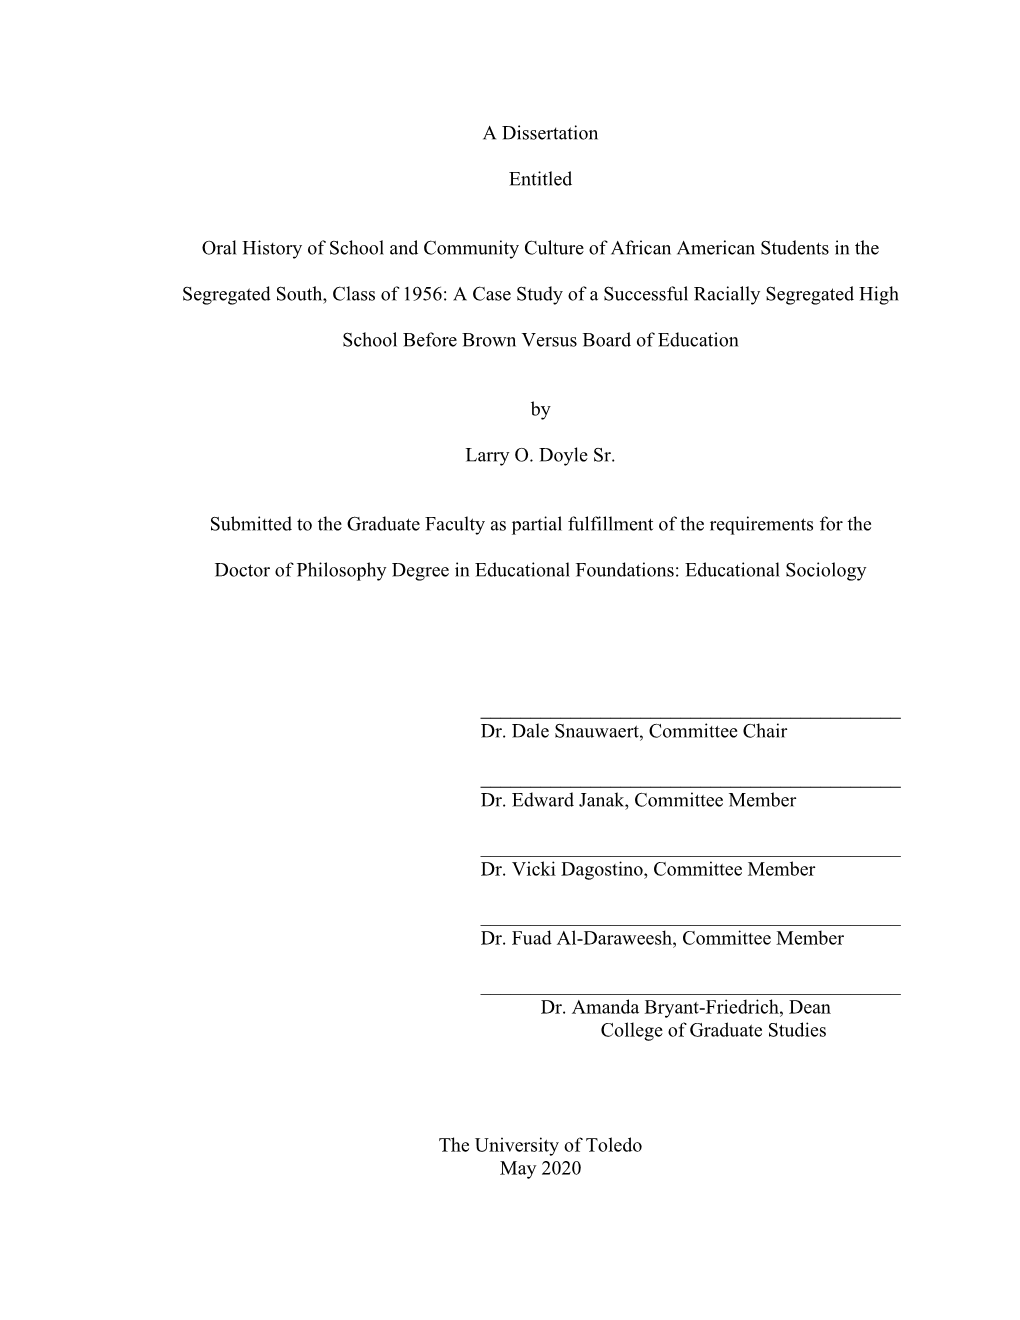 A Dissertation Entitled Oral History of School and Community Culture Of